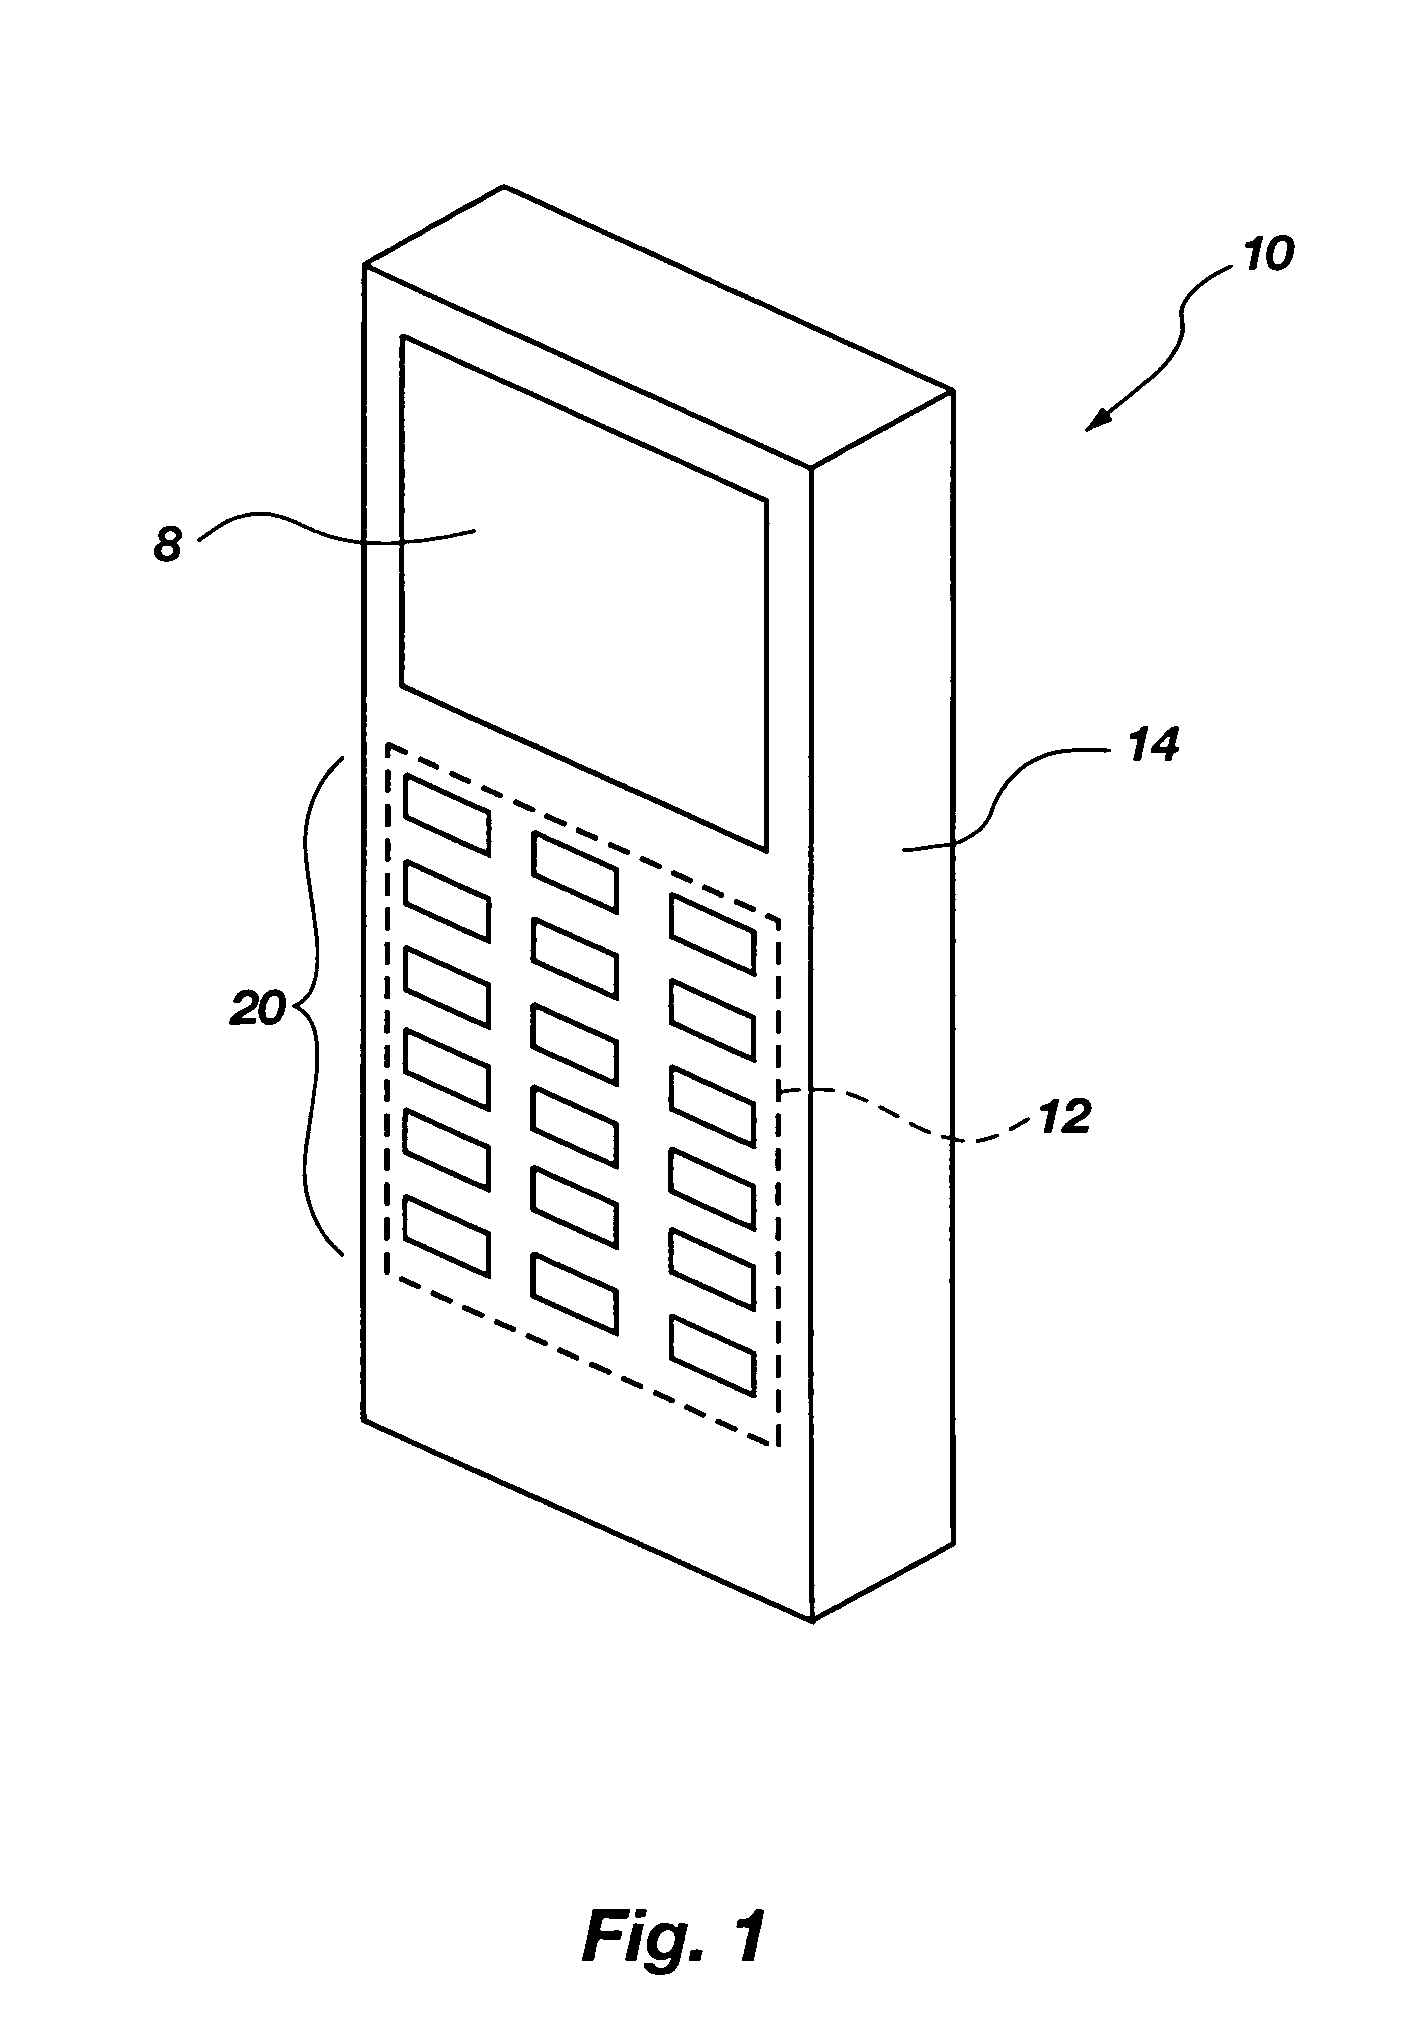 System for disposing a proximity sensitive touchpad behind a mobile phone keypad